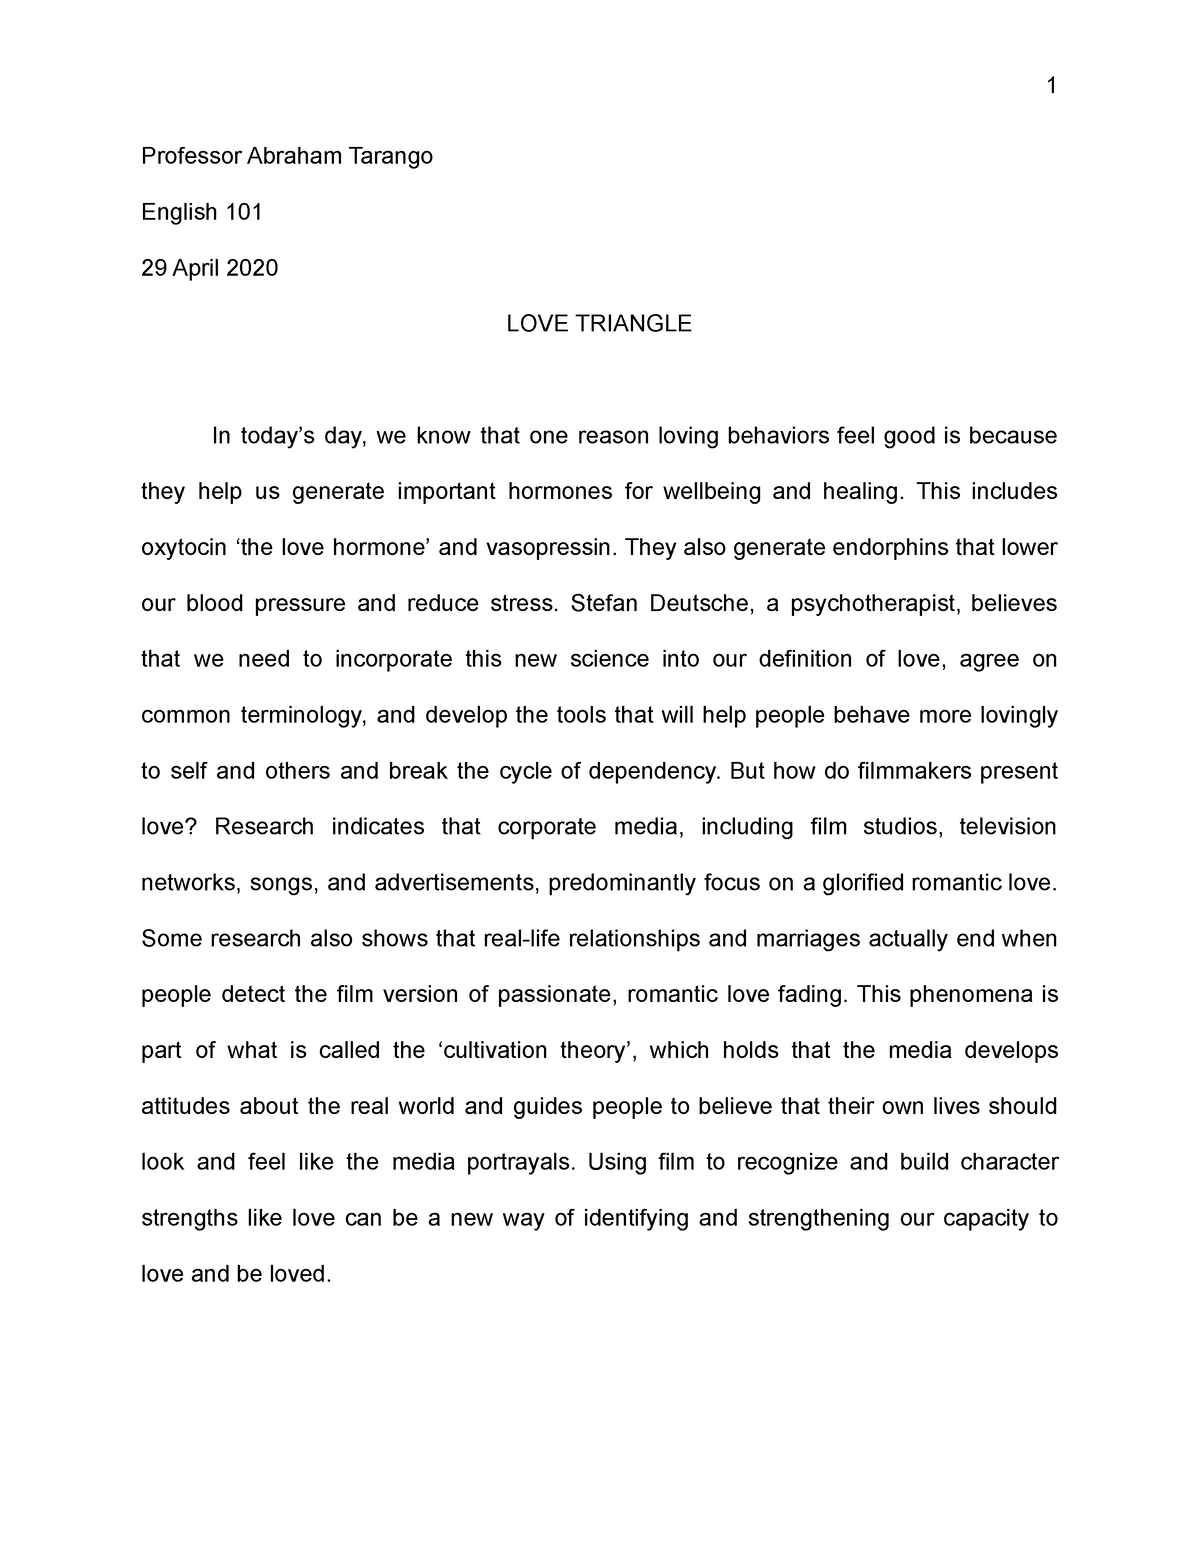 essay about love triangle